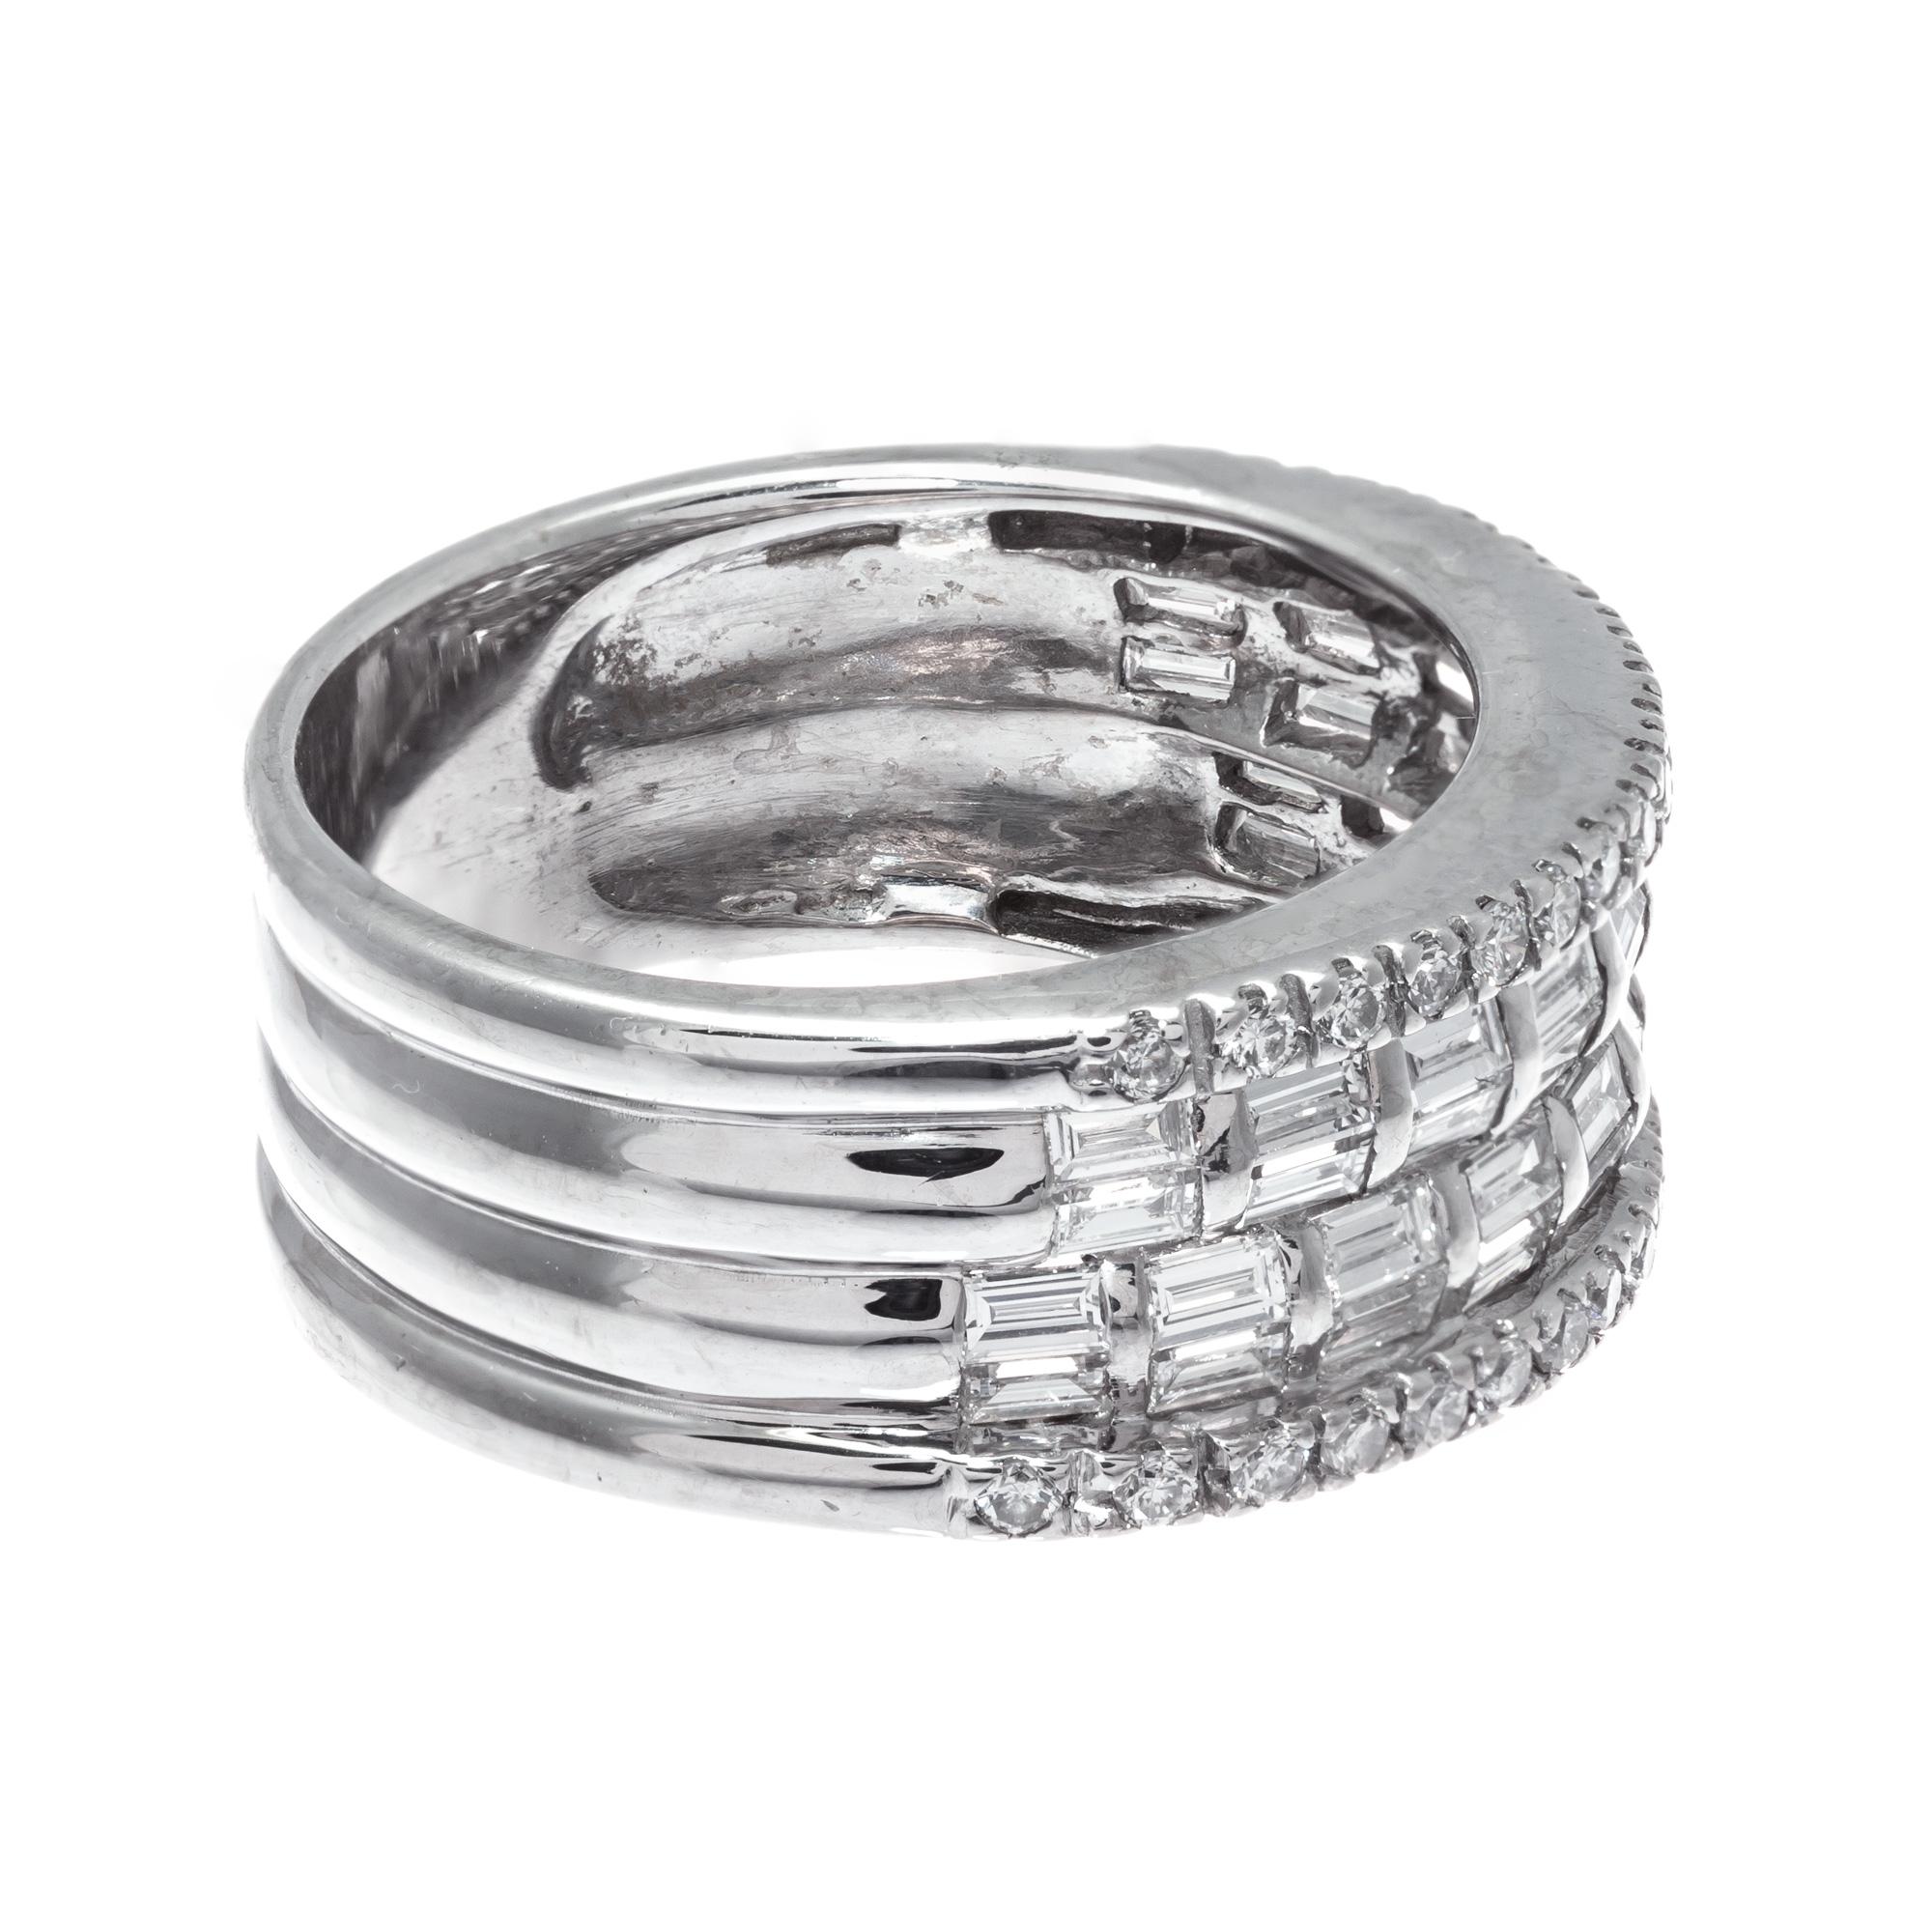 9mm wide four row baguette and round diamond band with bright white sparkly diamonds, in a 18k white gold setting. 

40 baguette cut G VS diamonds Approx. Total Weight 0.75cts.
38 round brilliant cut GH VS diamonds  Approx. Total Weight 0.25cts
Size